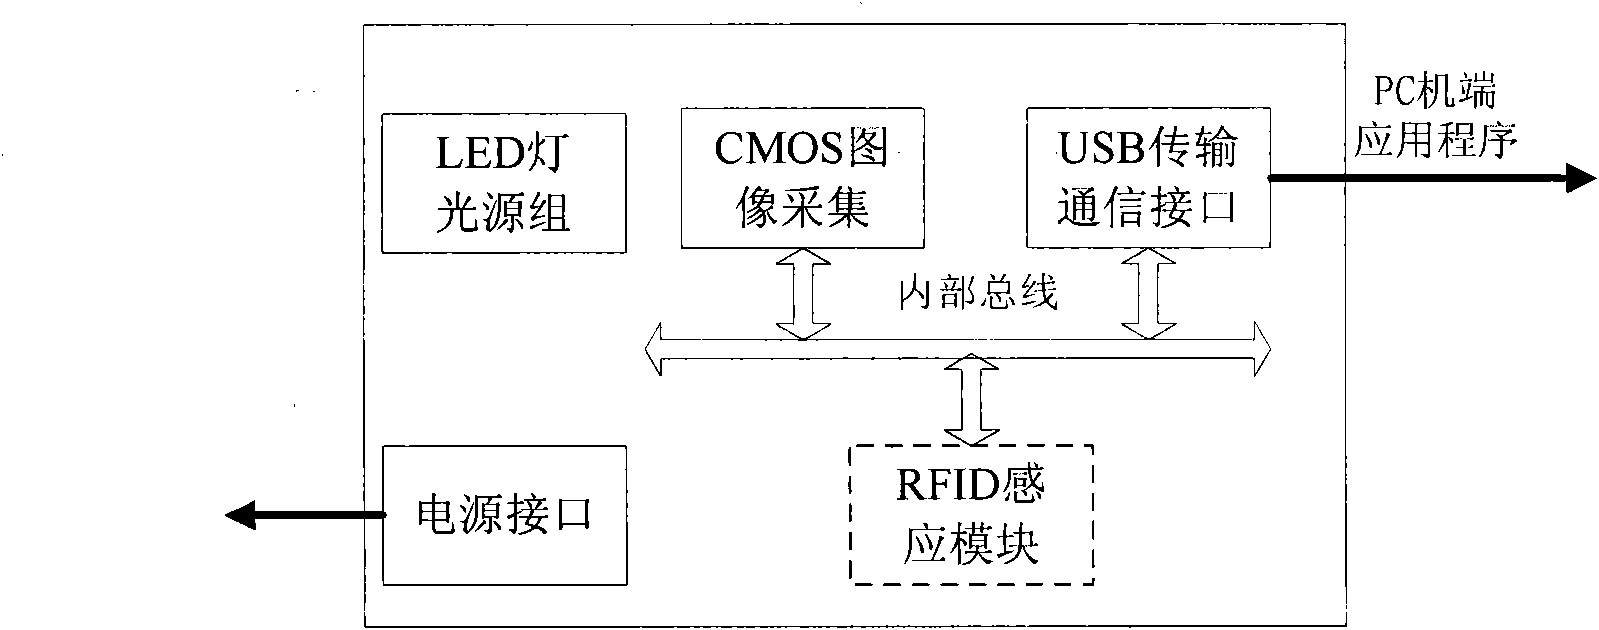 Multifunctional certificate information collection system